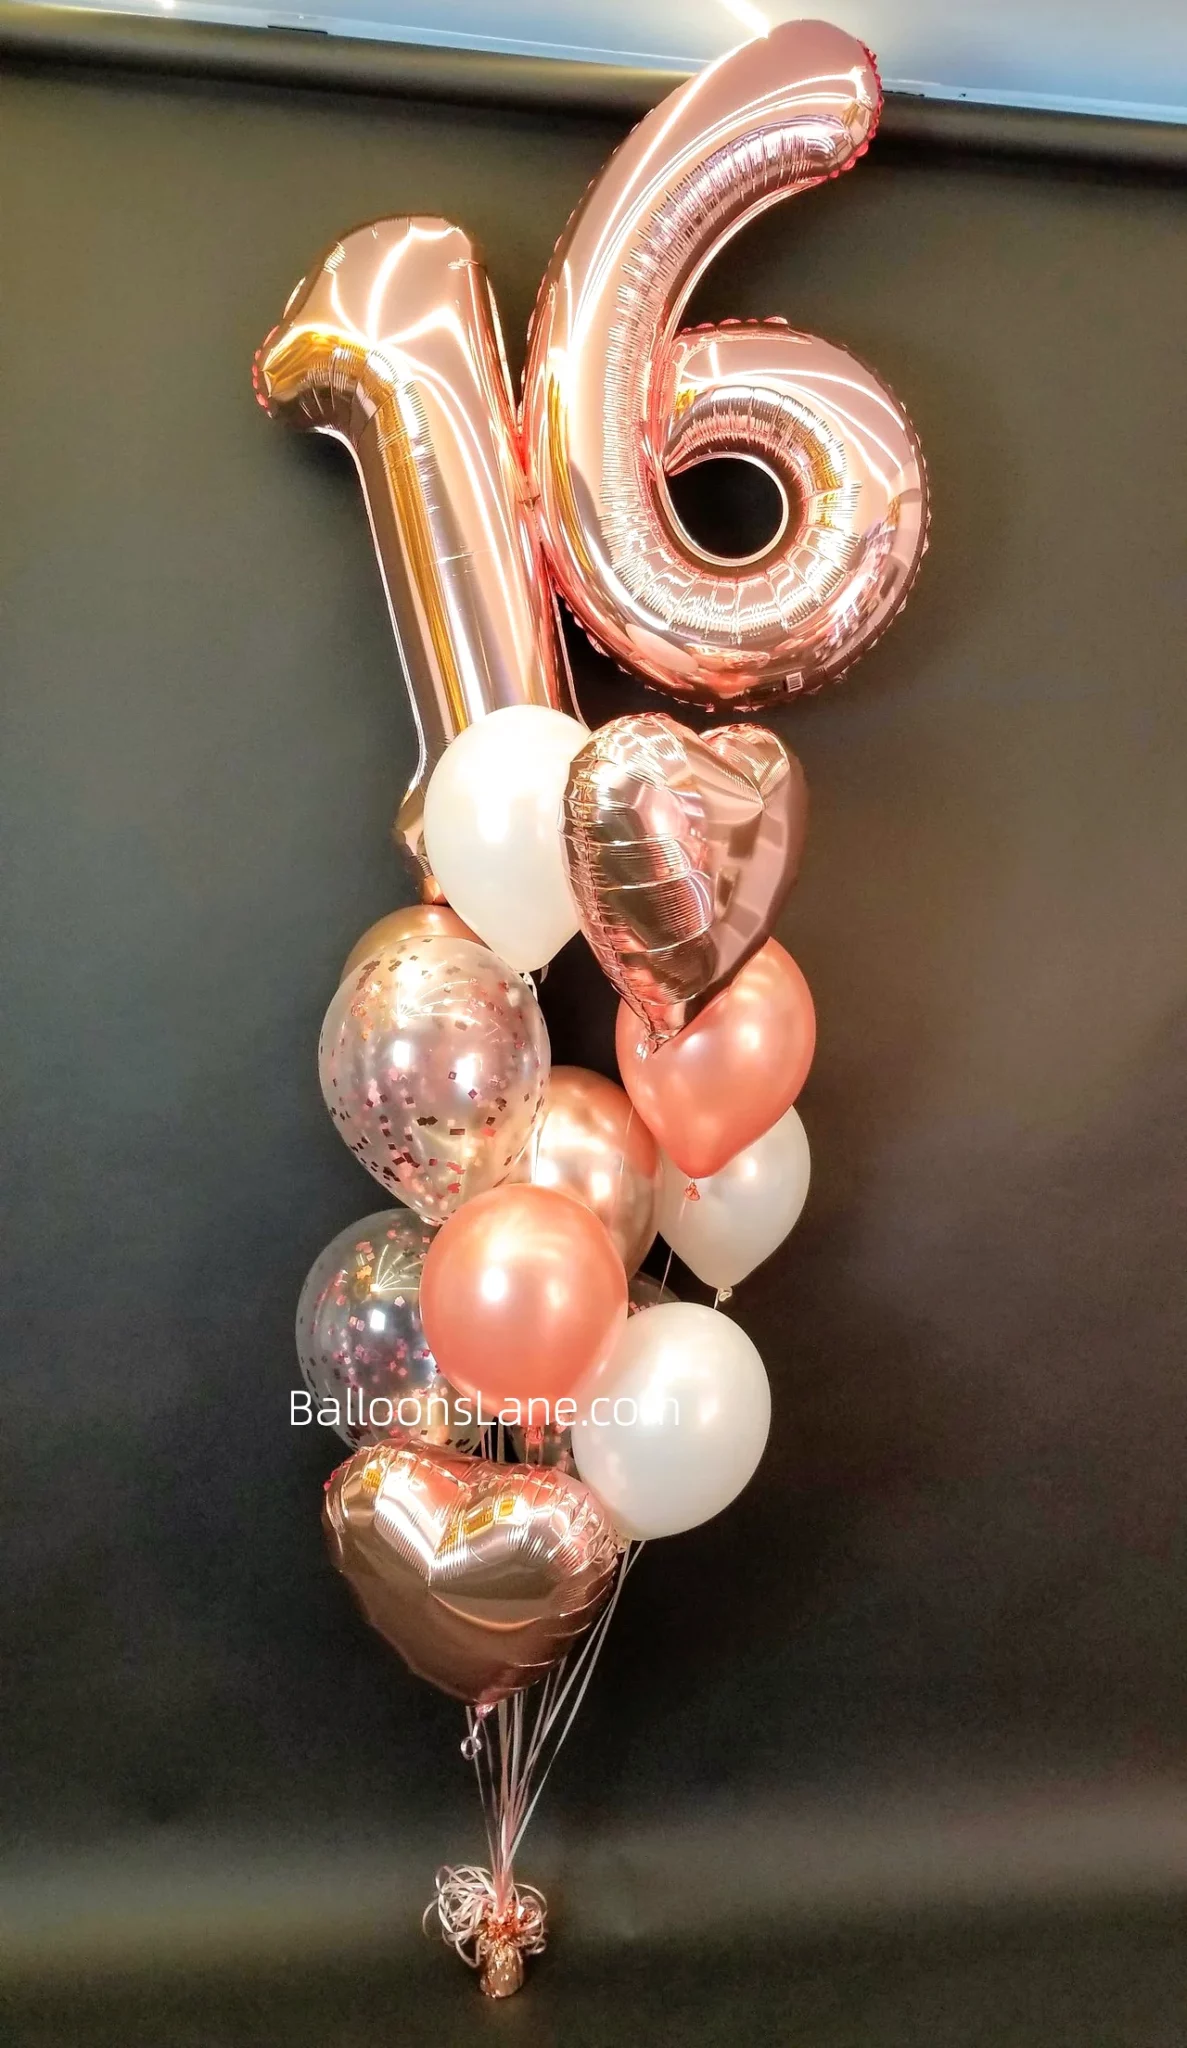 Rose Gold Number 1 & 6 Balloon Bouquet with Heart-Shaped Balloons and White Balloons in Brooklyn